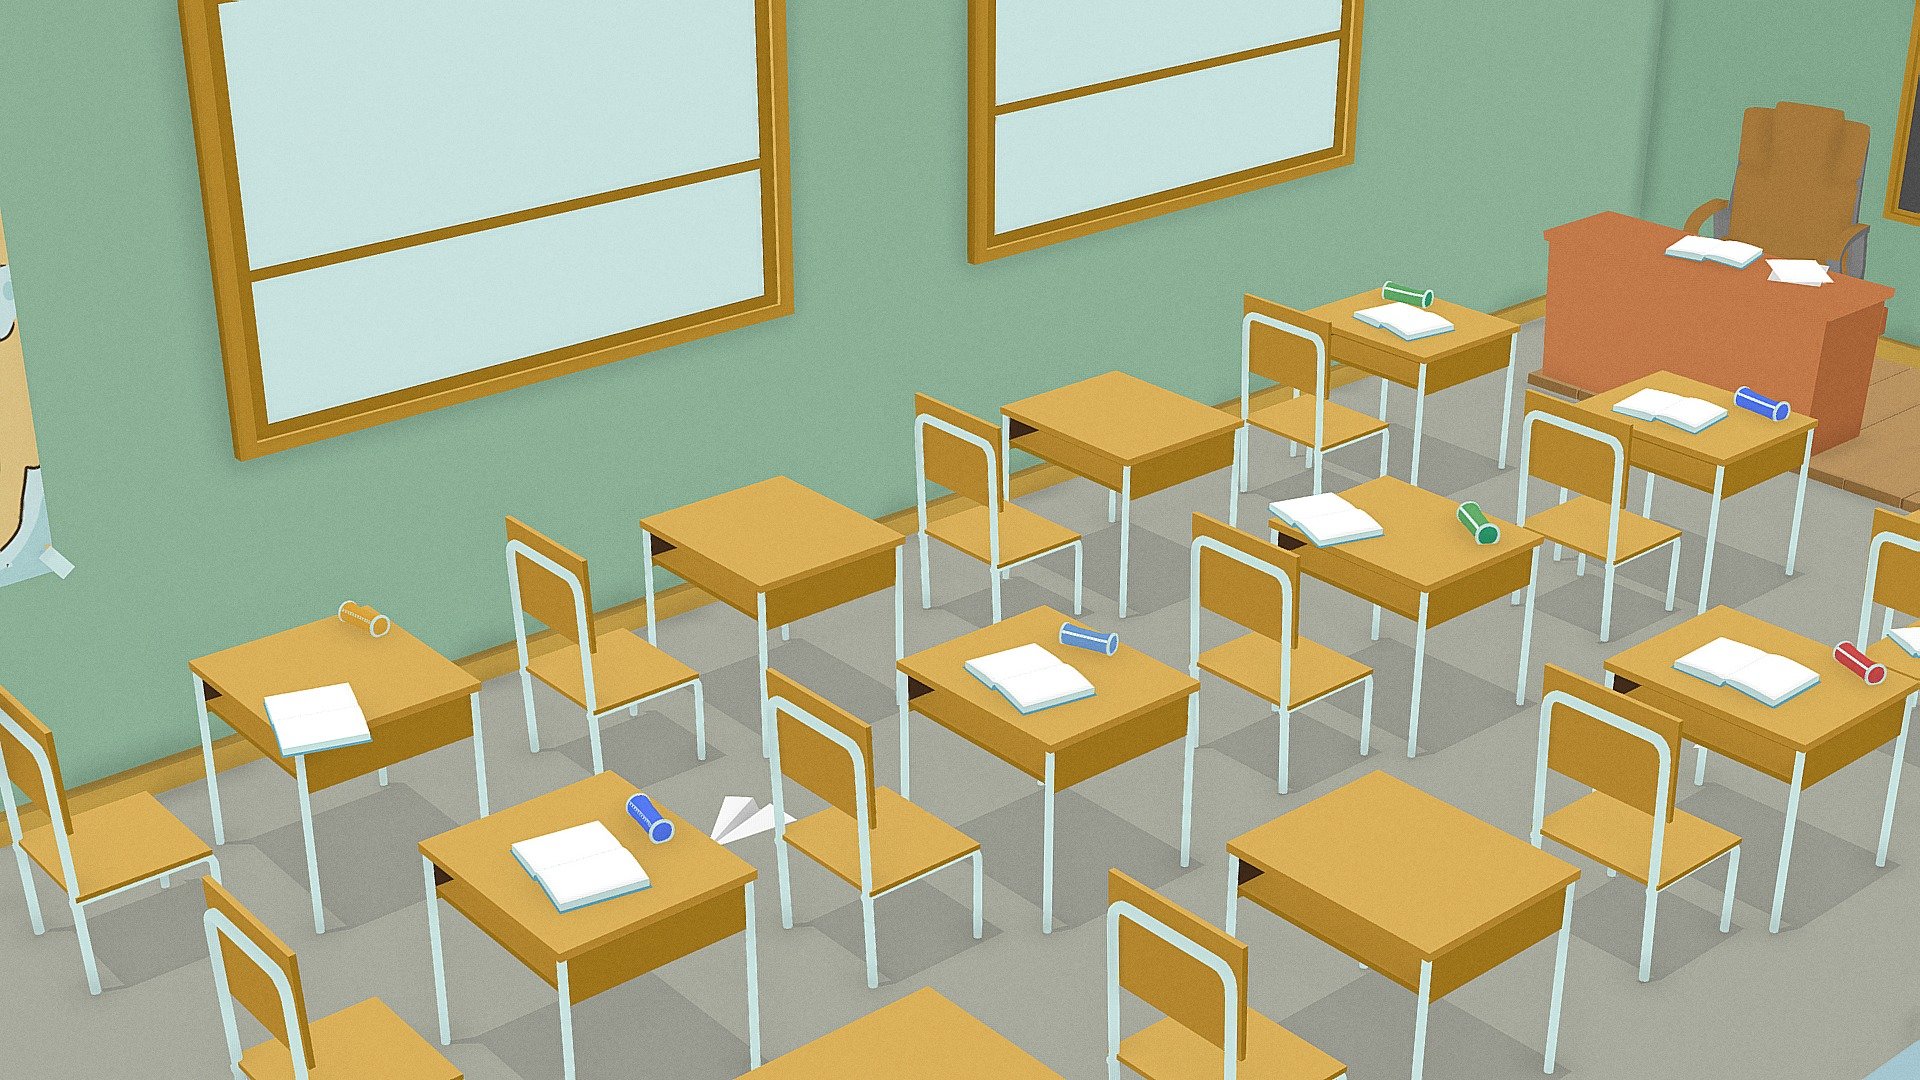 School classroom - High detail - Blender 2.91/Evee - 2021

Realised by SDC - Free download

Note that the model does not have lighting everything happens in the colors 3d model